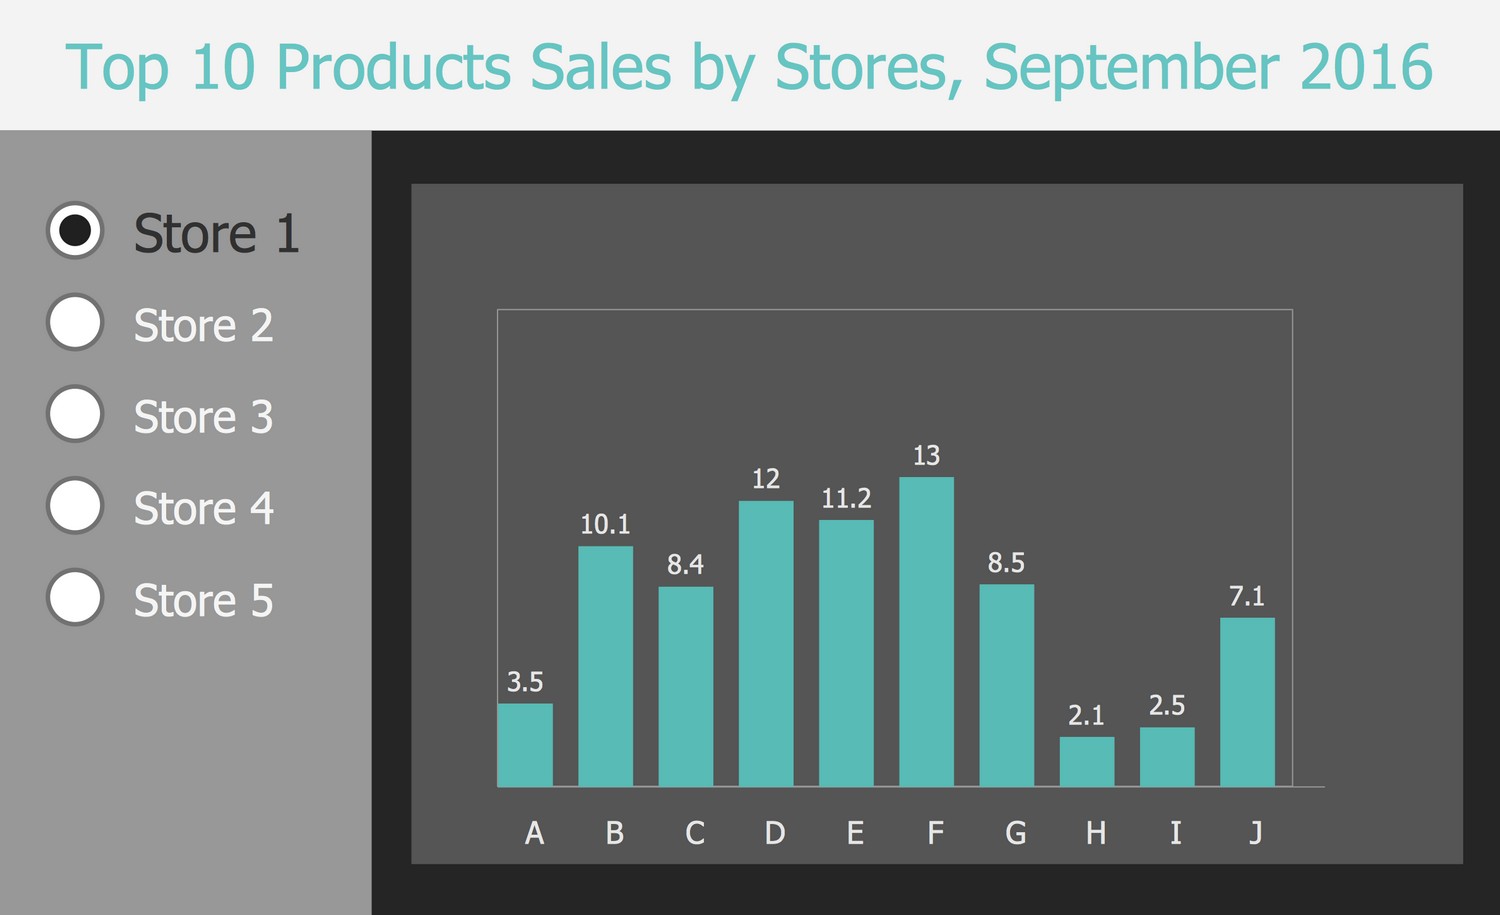 Business Intelligence Dashboard - Top 10 Products Sales by Stores, September 2016